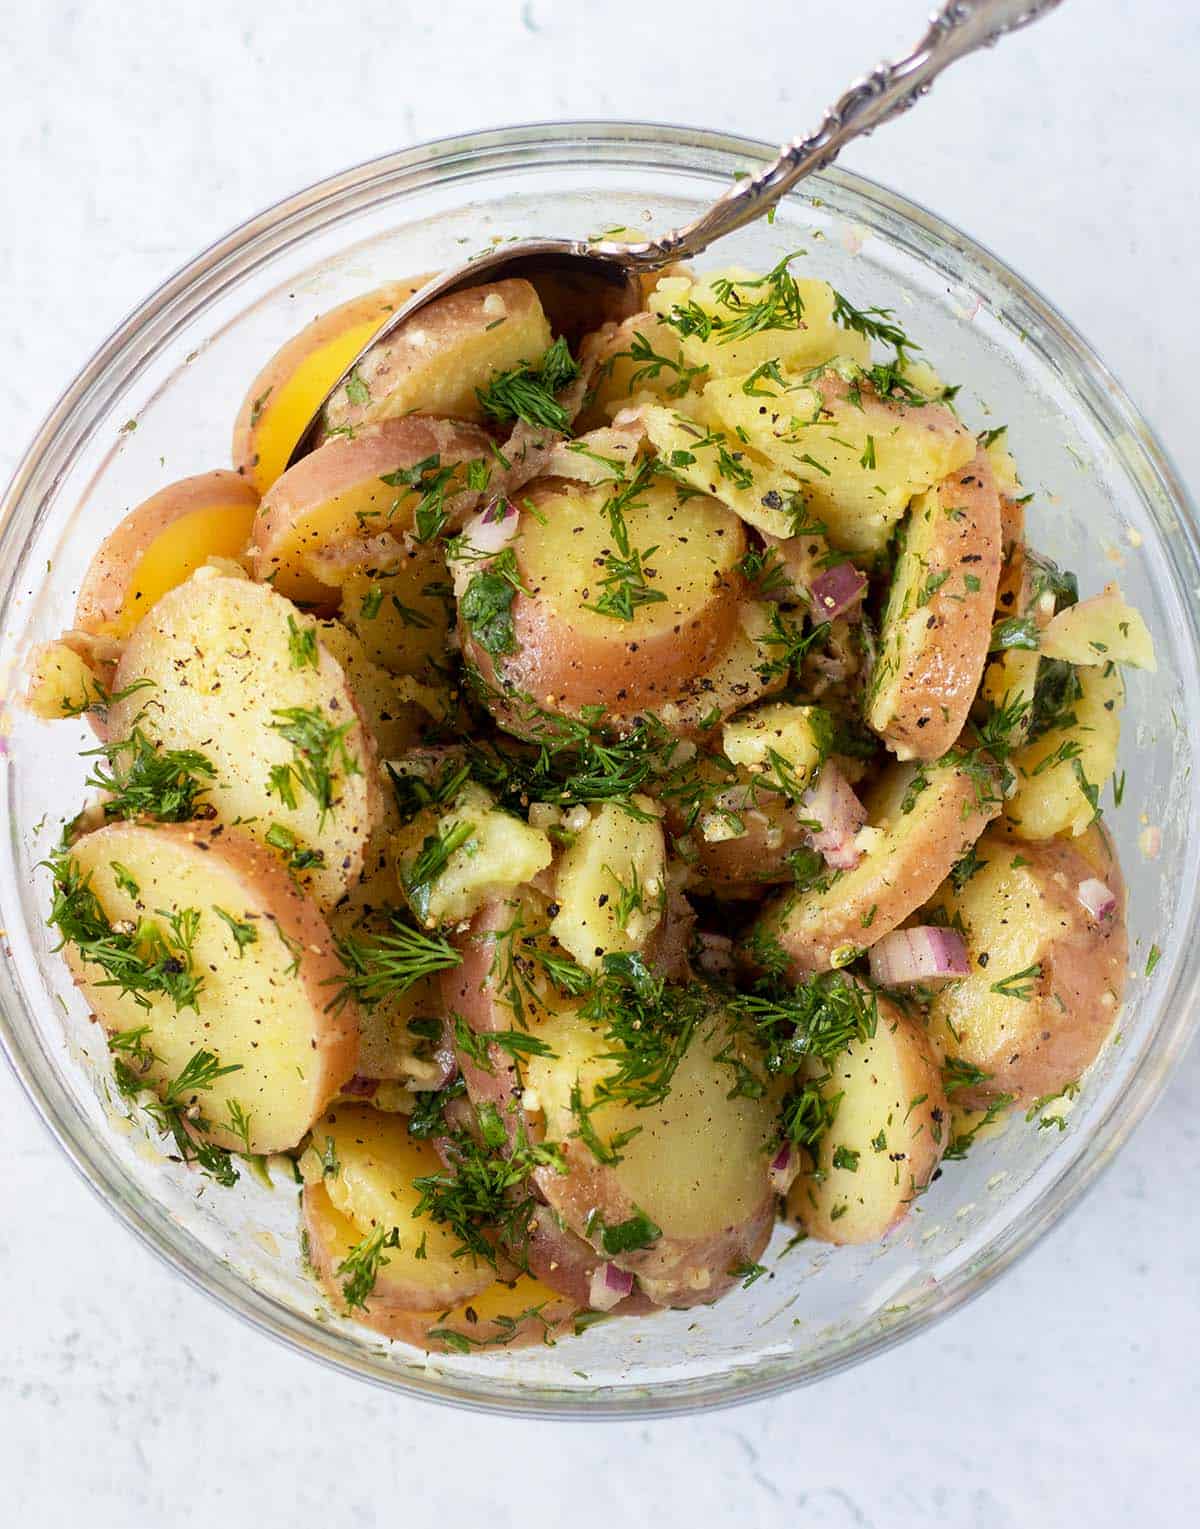 Lemon dill potato salad in large clear glass serving bowl with silver serving spoon.